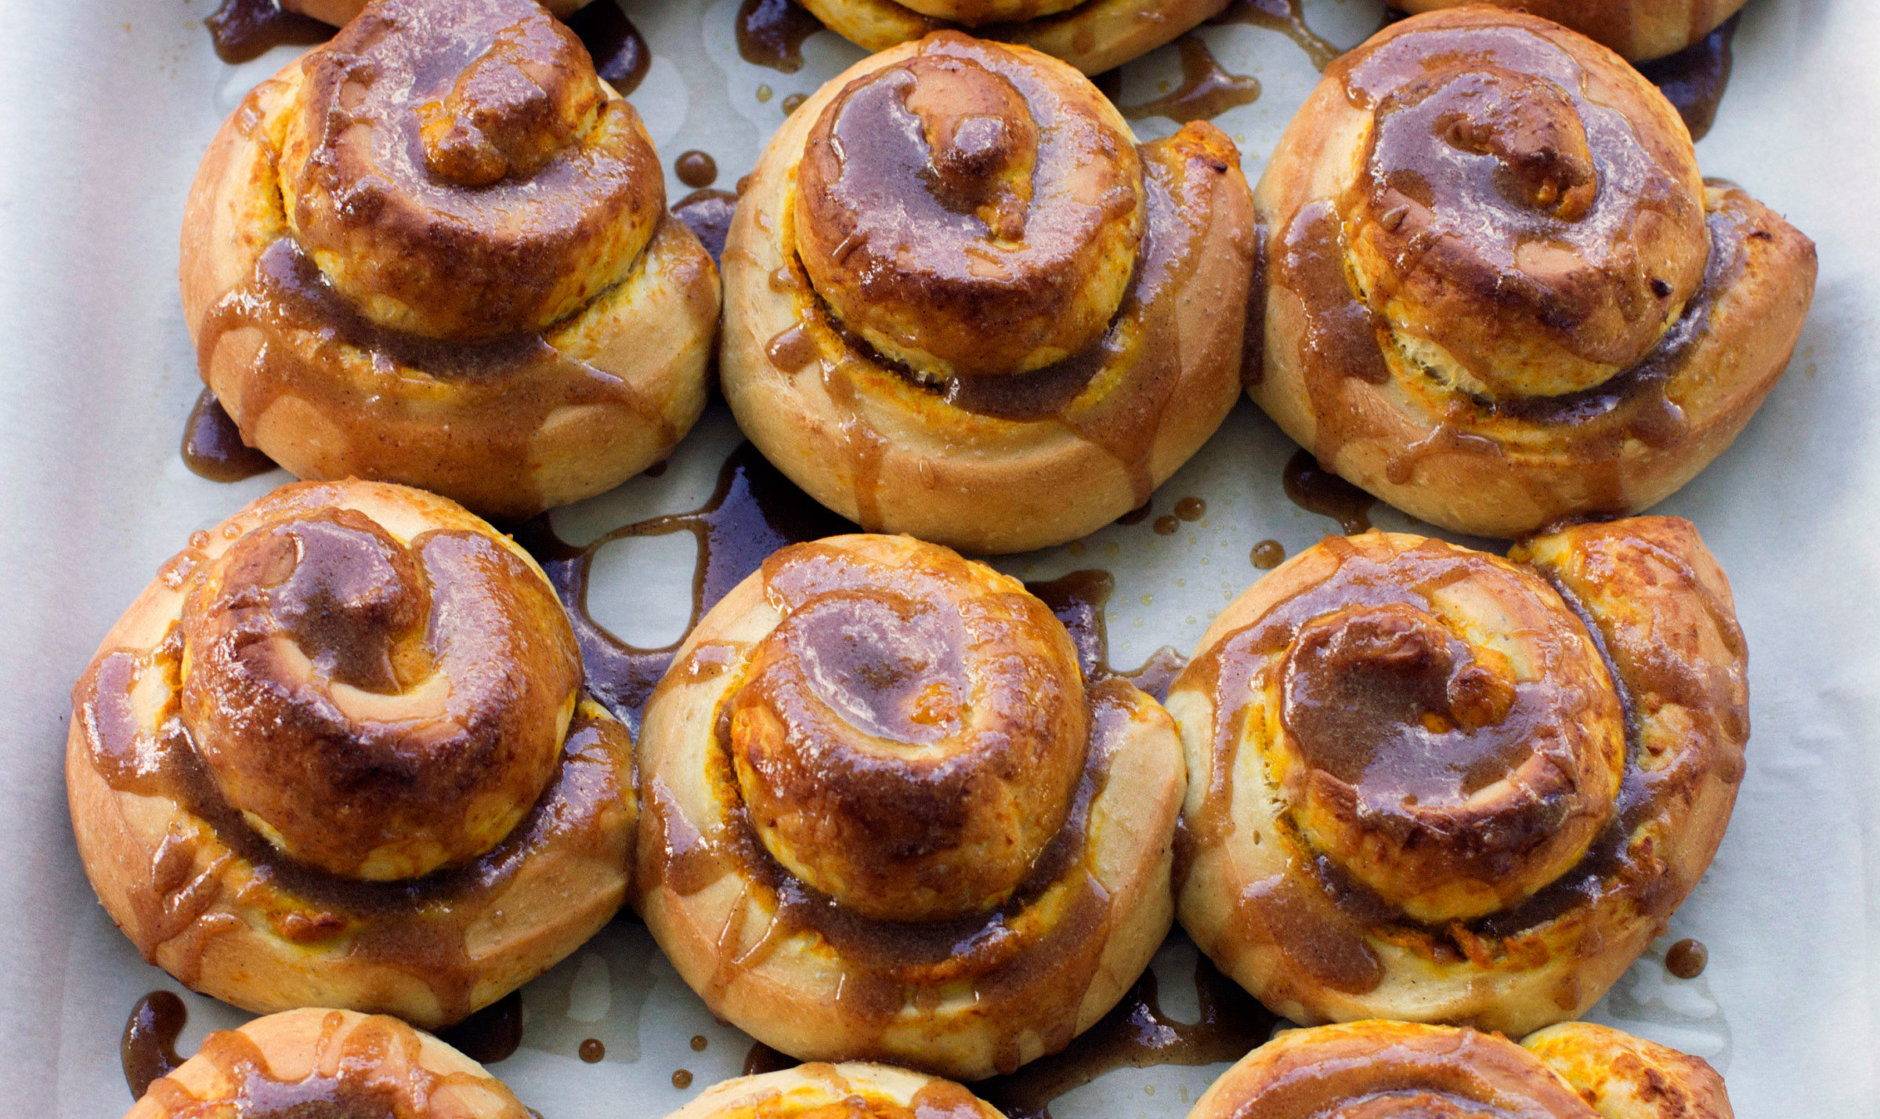 This Sept. 8, 2014 photo shows salted caramel pumpkin buns in Concord, N.H.The bun combines two classics, pumpkin pie and a cinnamon bun, which is topped with a homemade caramel sauce. (AP Photo/Matthew Mead)